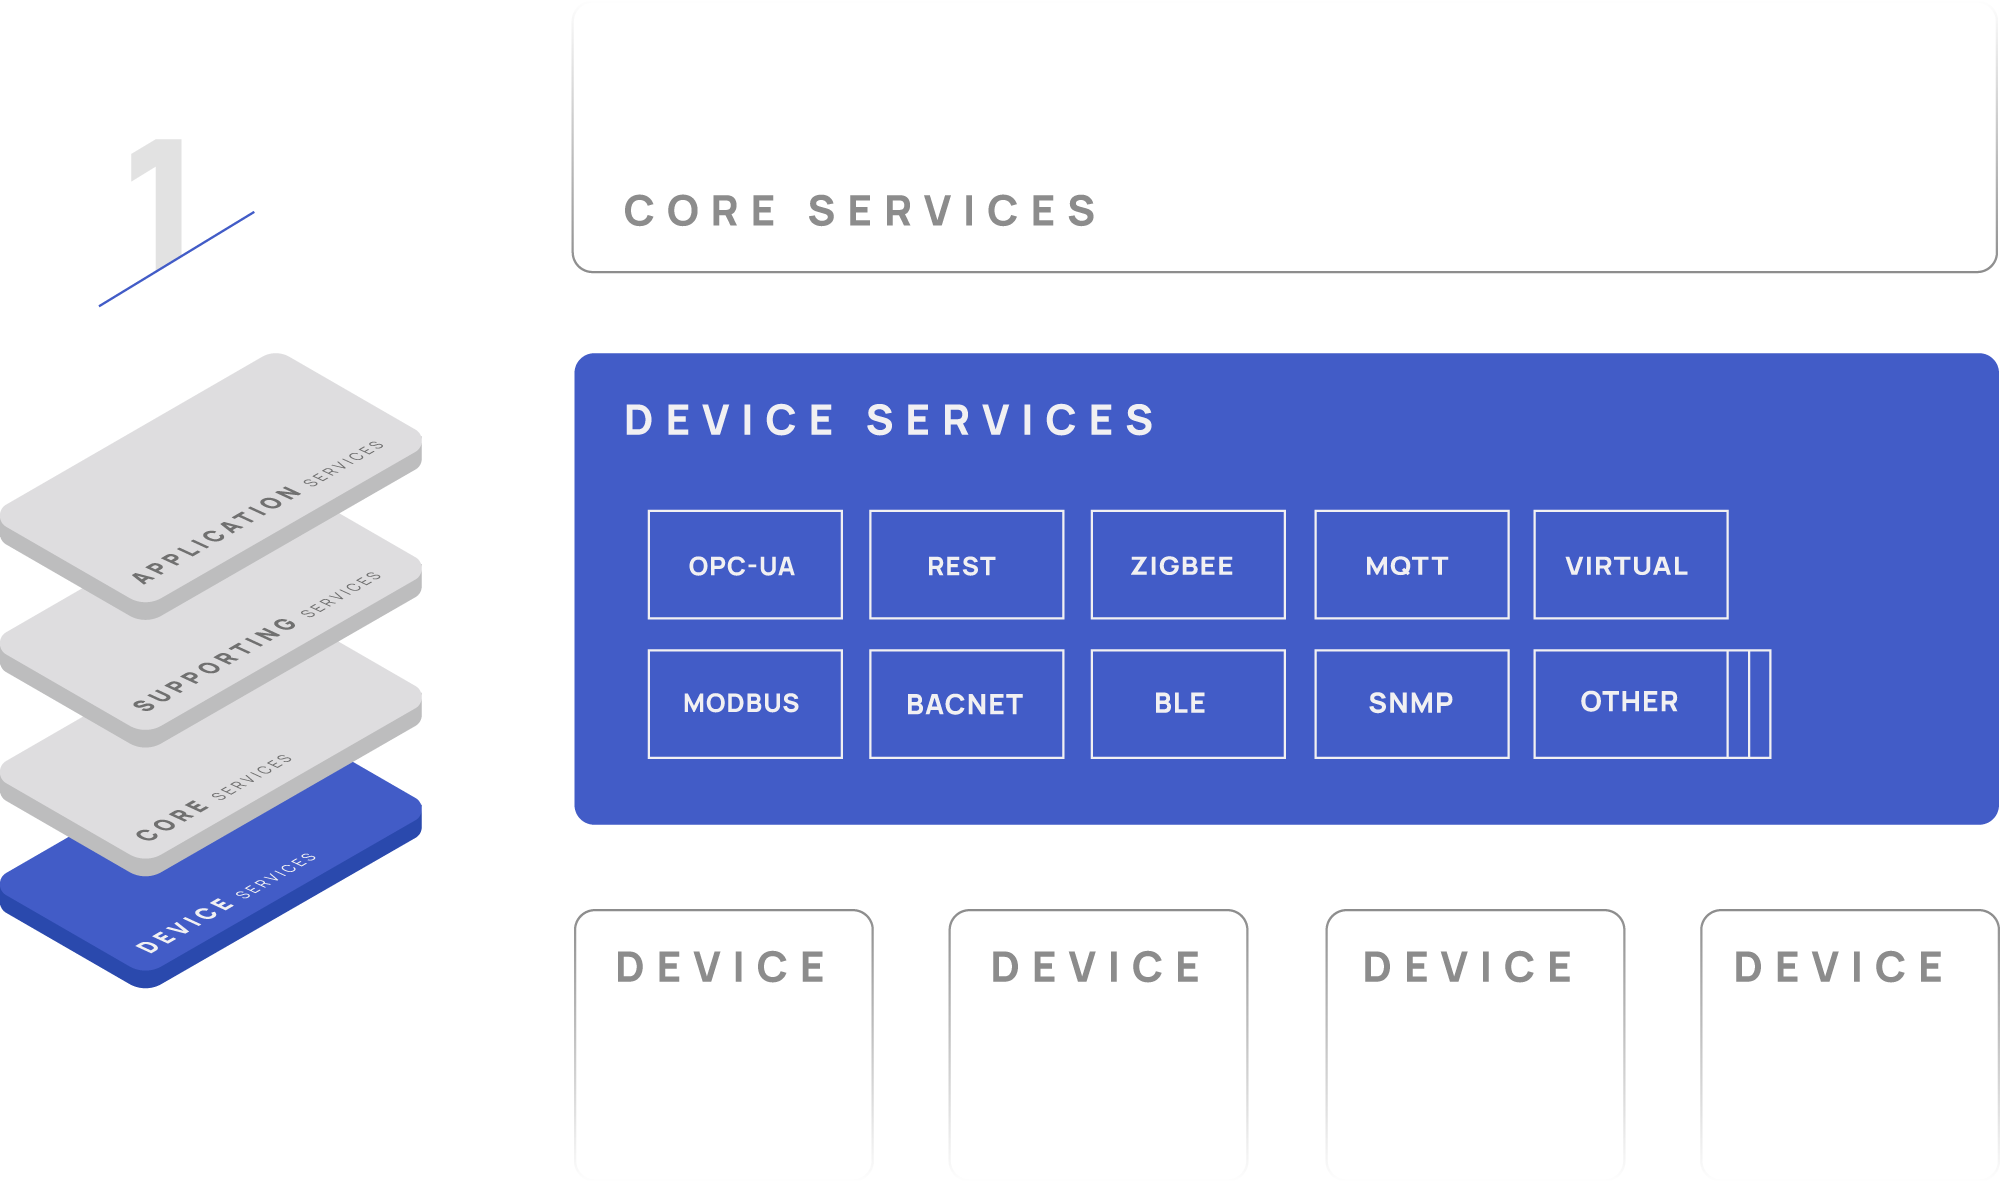 Device Services | EdgeX Foundry